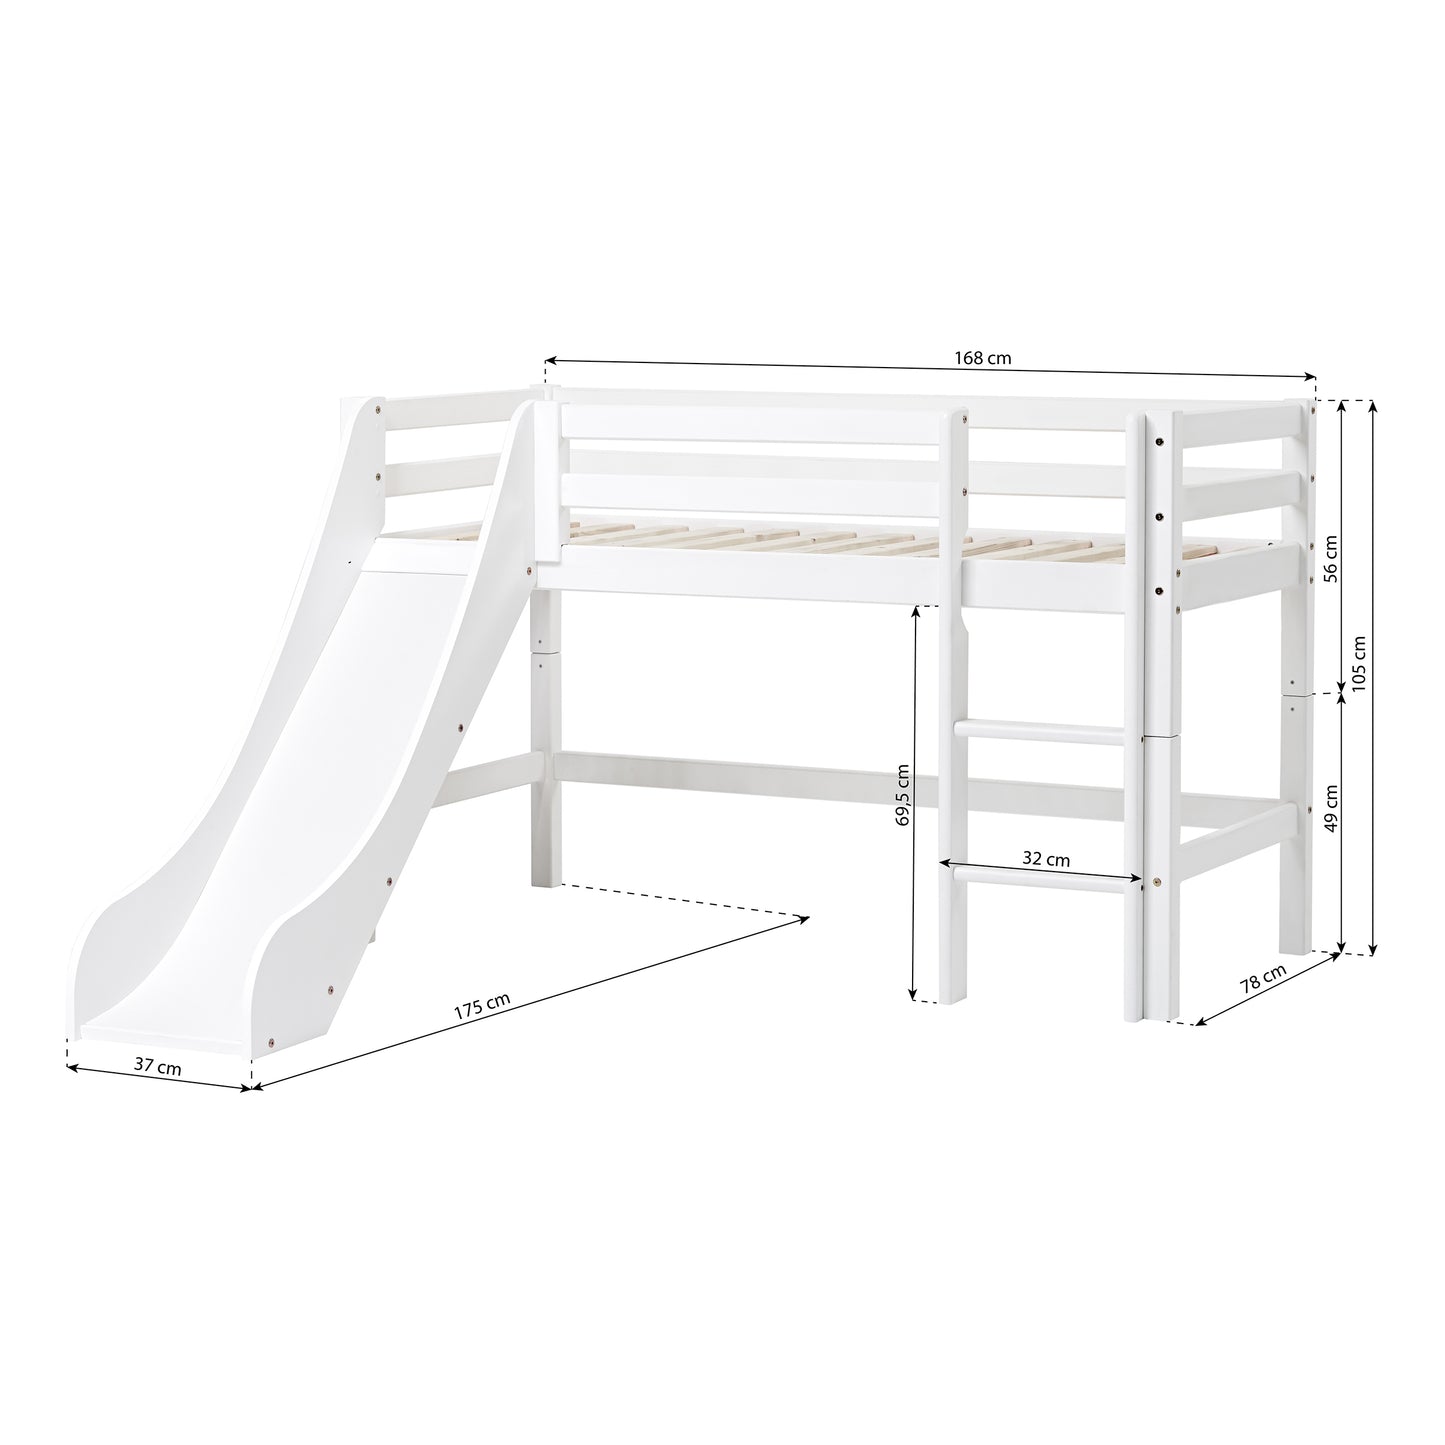 Hoppekids Eco Dream Mid Sleeper Bed with Slide - White (2 Sizes Available)